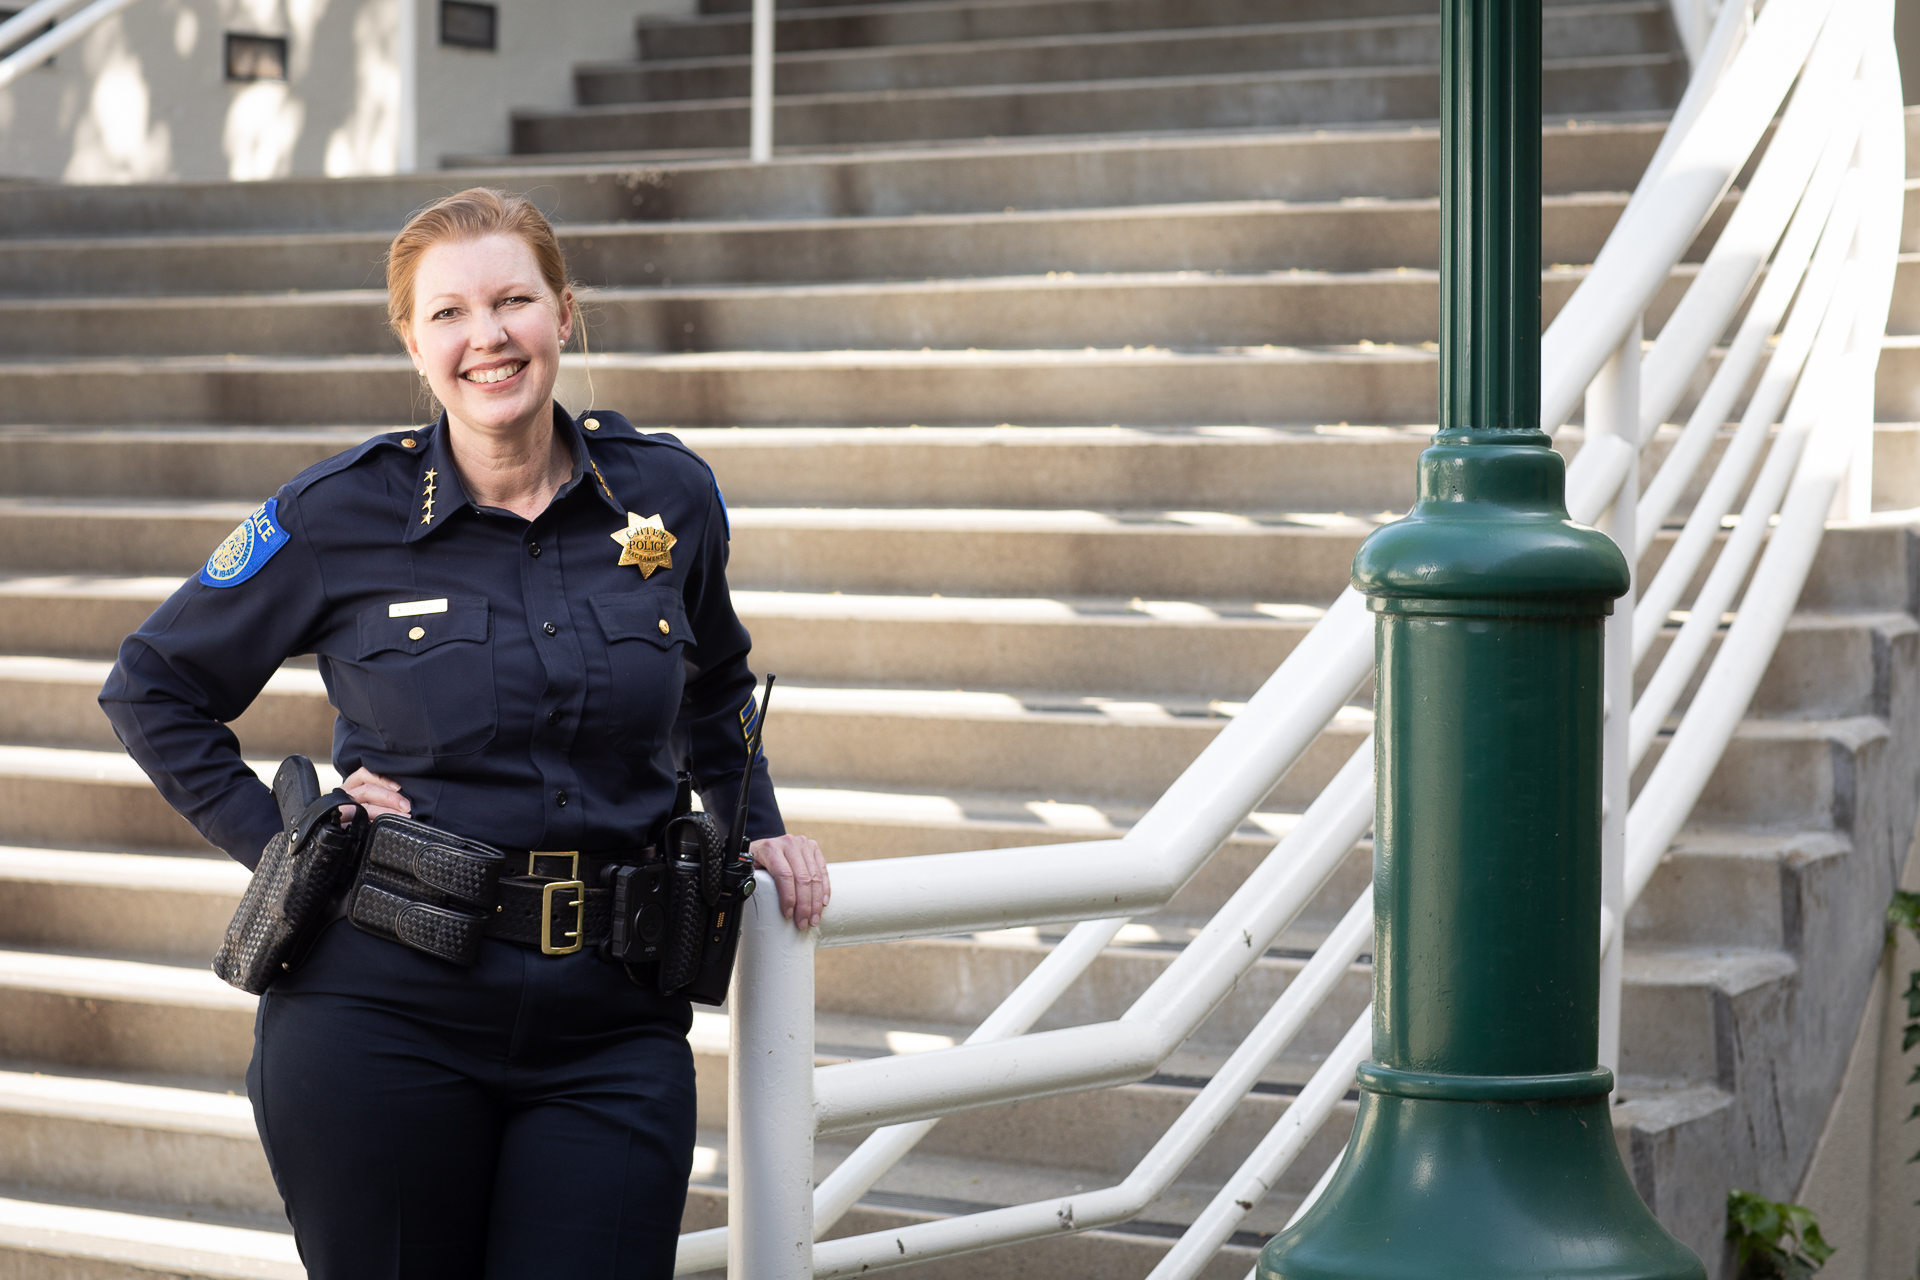 Sacramento Police Chief Kathy Lester, in uniform, standing outside in front of a staircase.